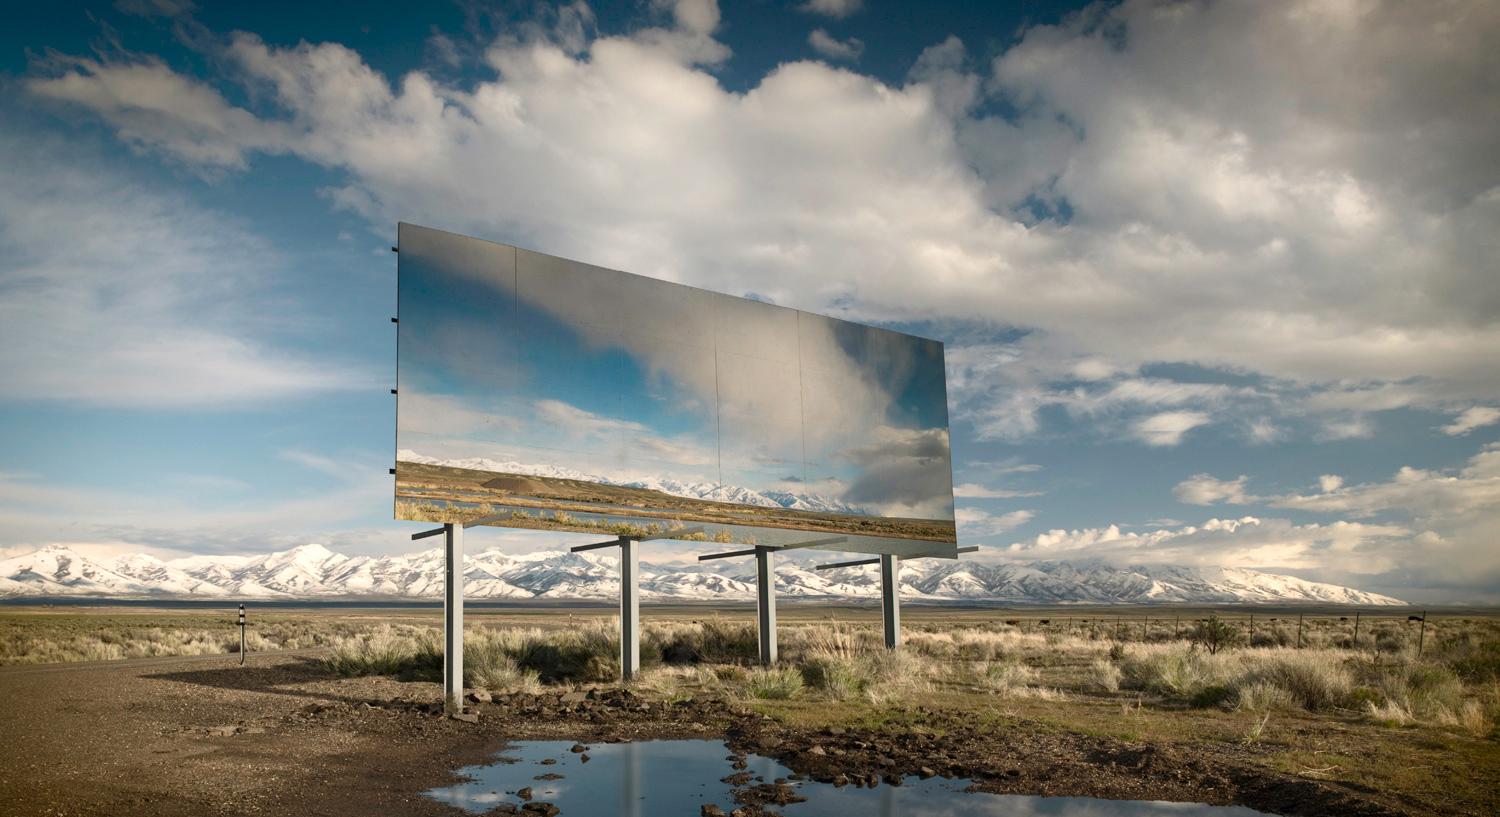 Close Up - large format photograph of conceptual billboard sign in landscape